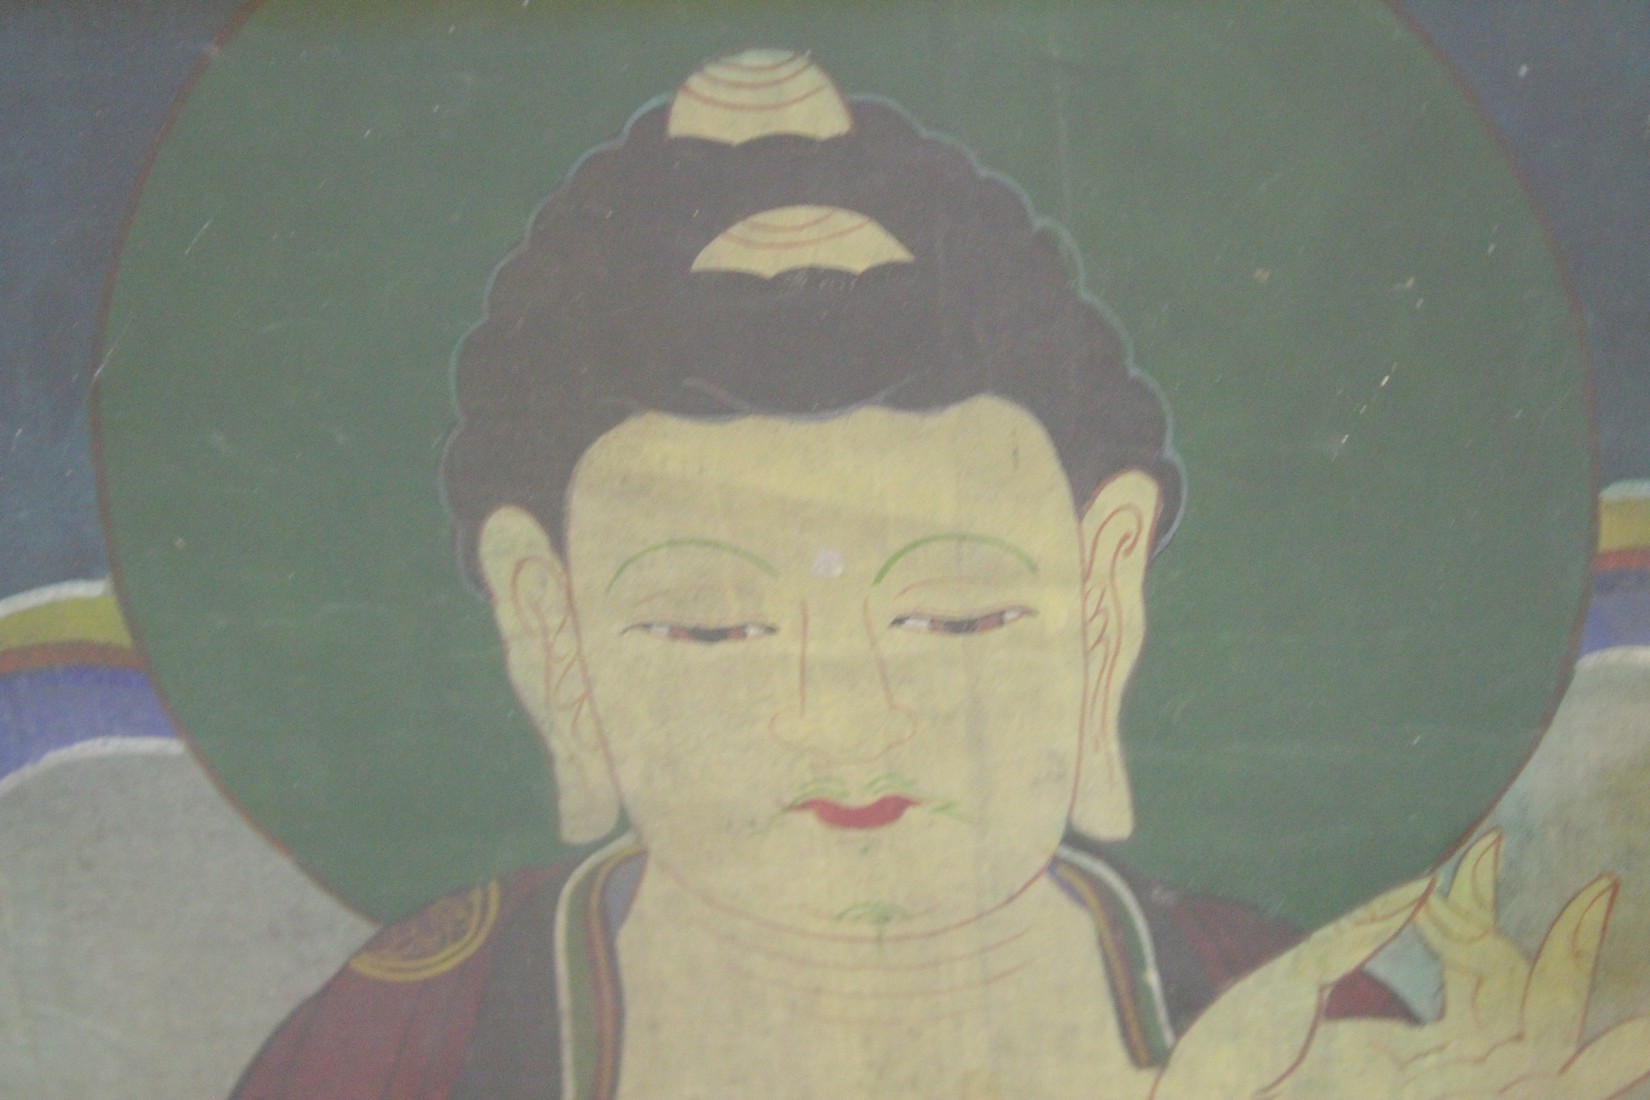 A FINE 19TH CENTURY PAINTING 'FIVE BUDDHAS', framed and glazed, image 71cm x 119.5cm. - Image 4 of 6